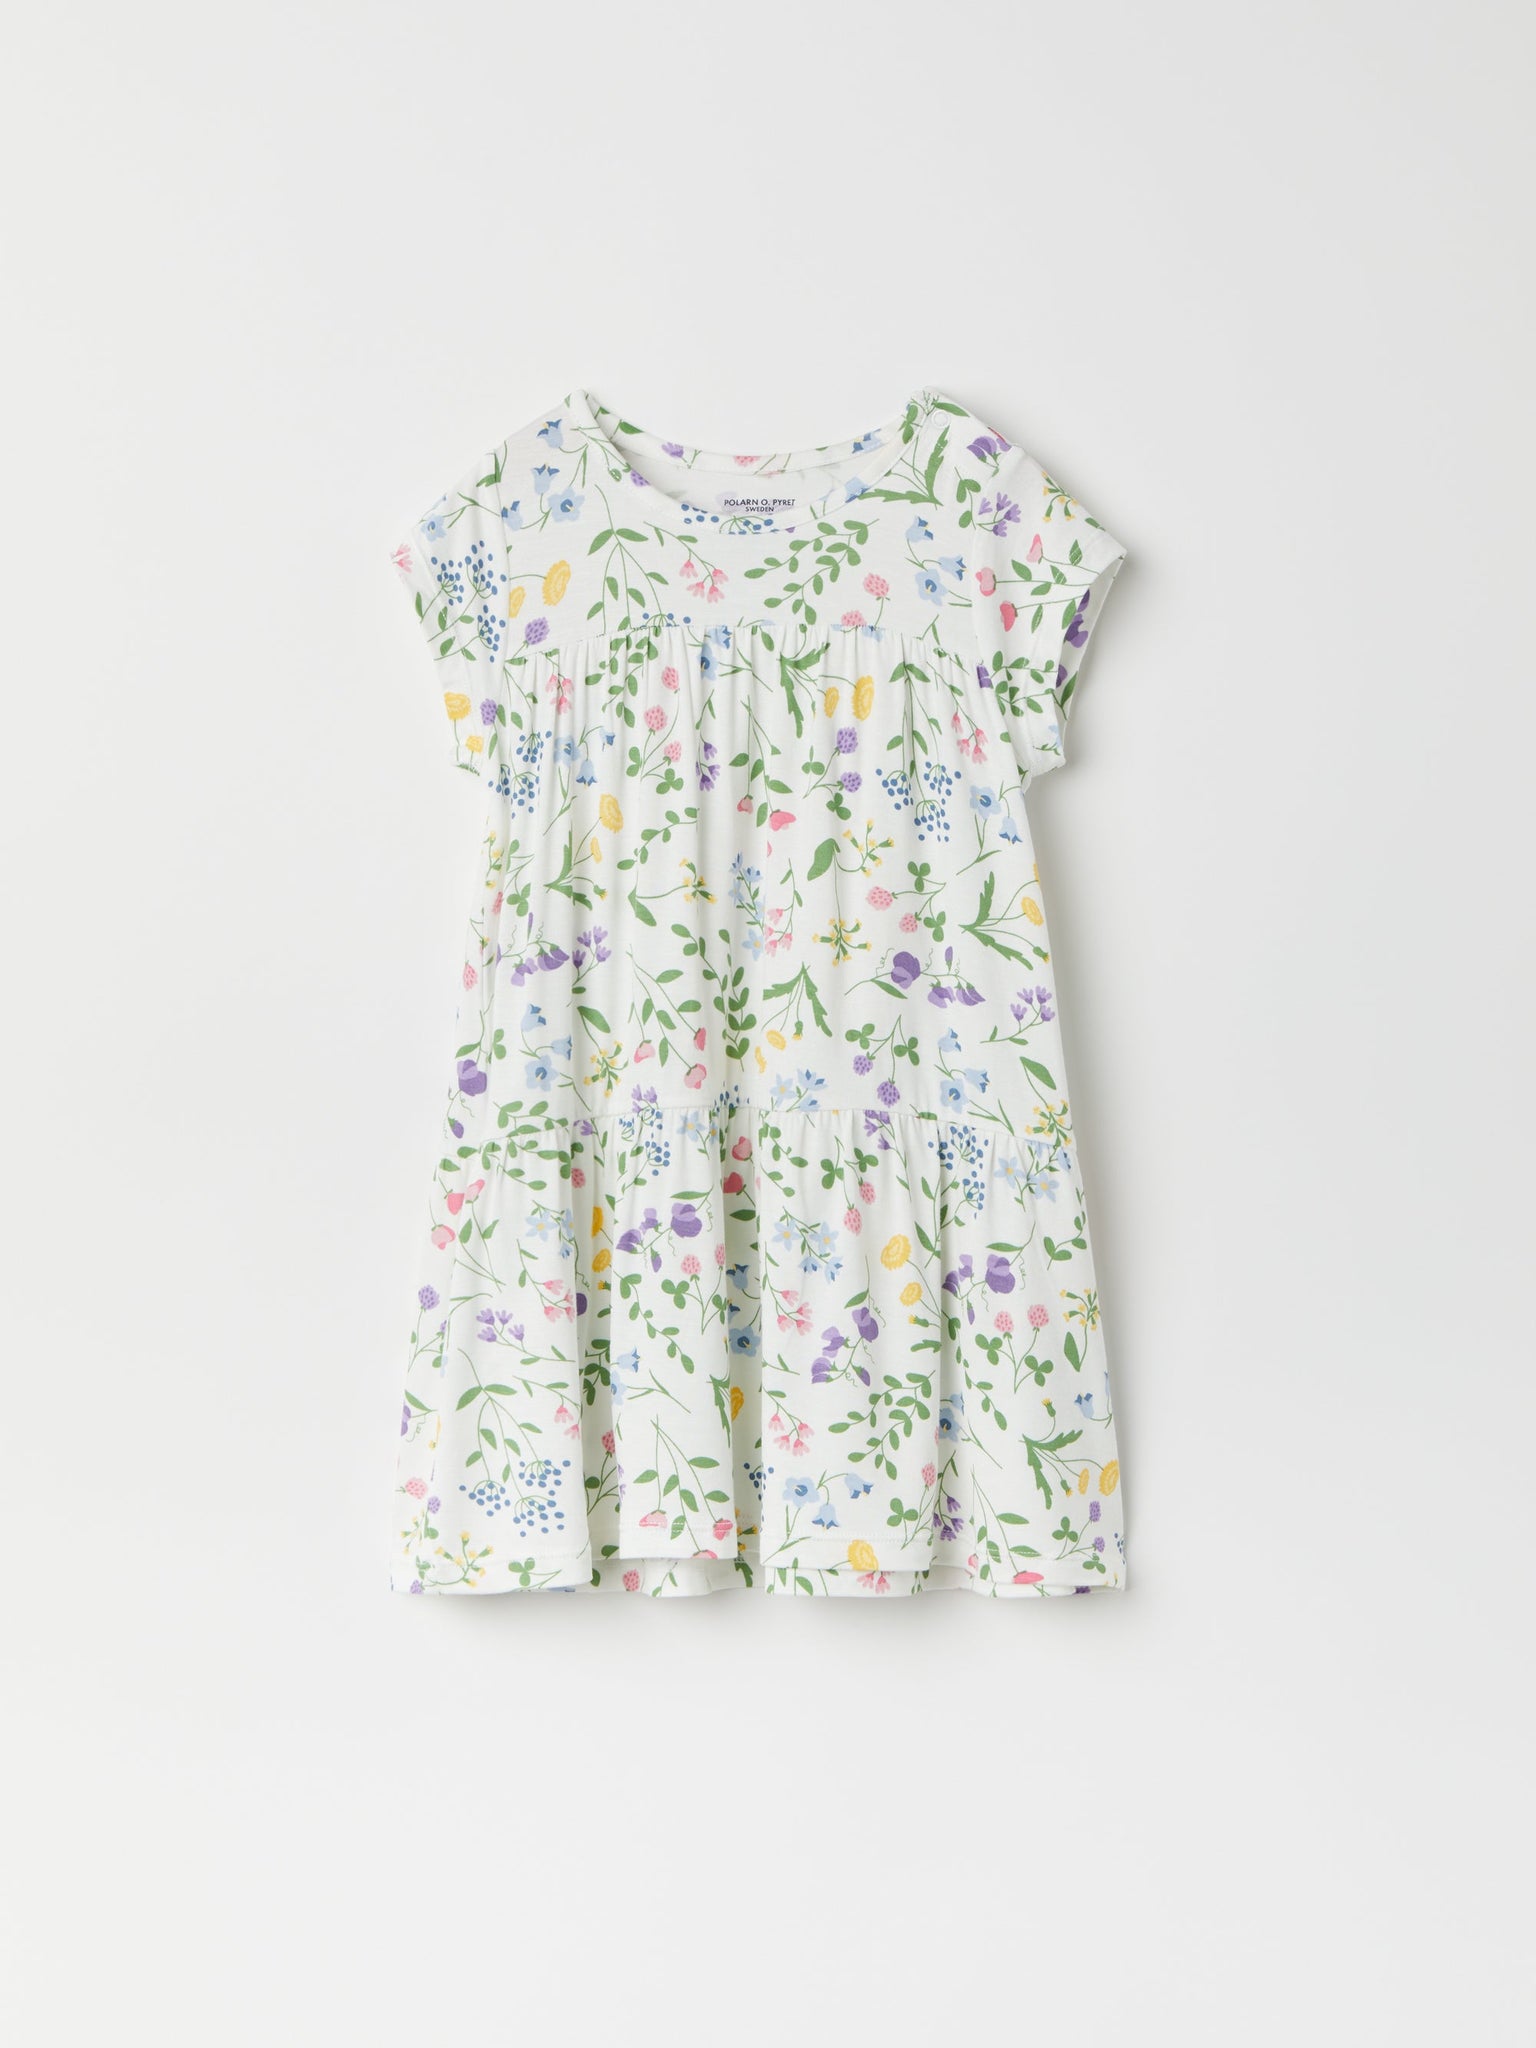 Ditsy FloralOrganic Cotton Baby Dress from the Polarn O. Pyret baby collection. Clothes made using sustainably sourced materials.